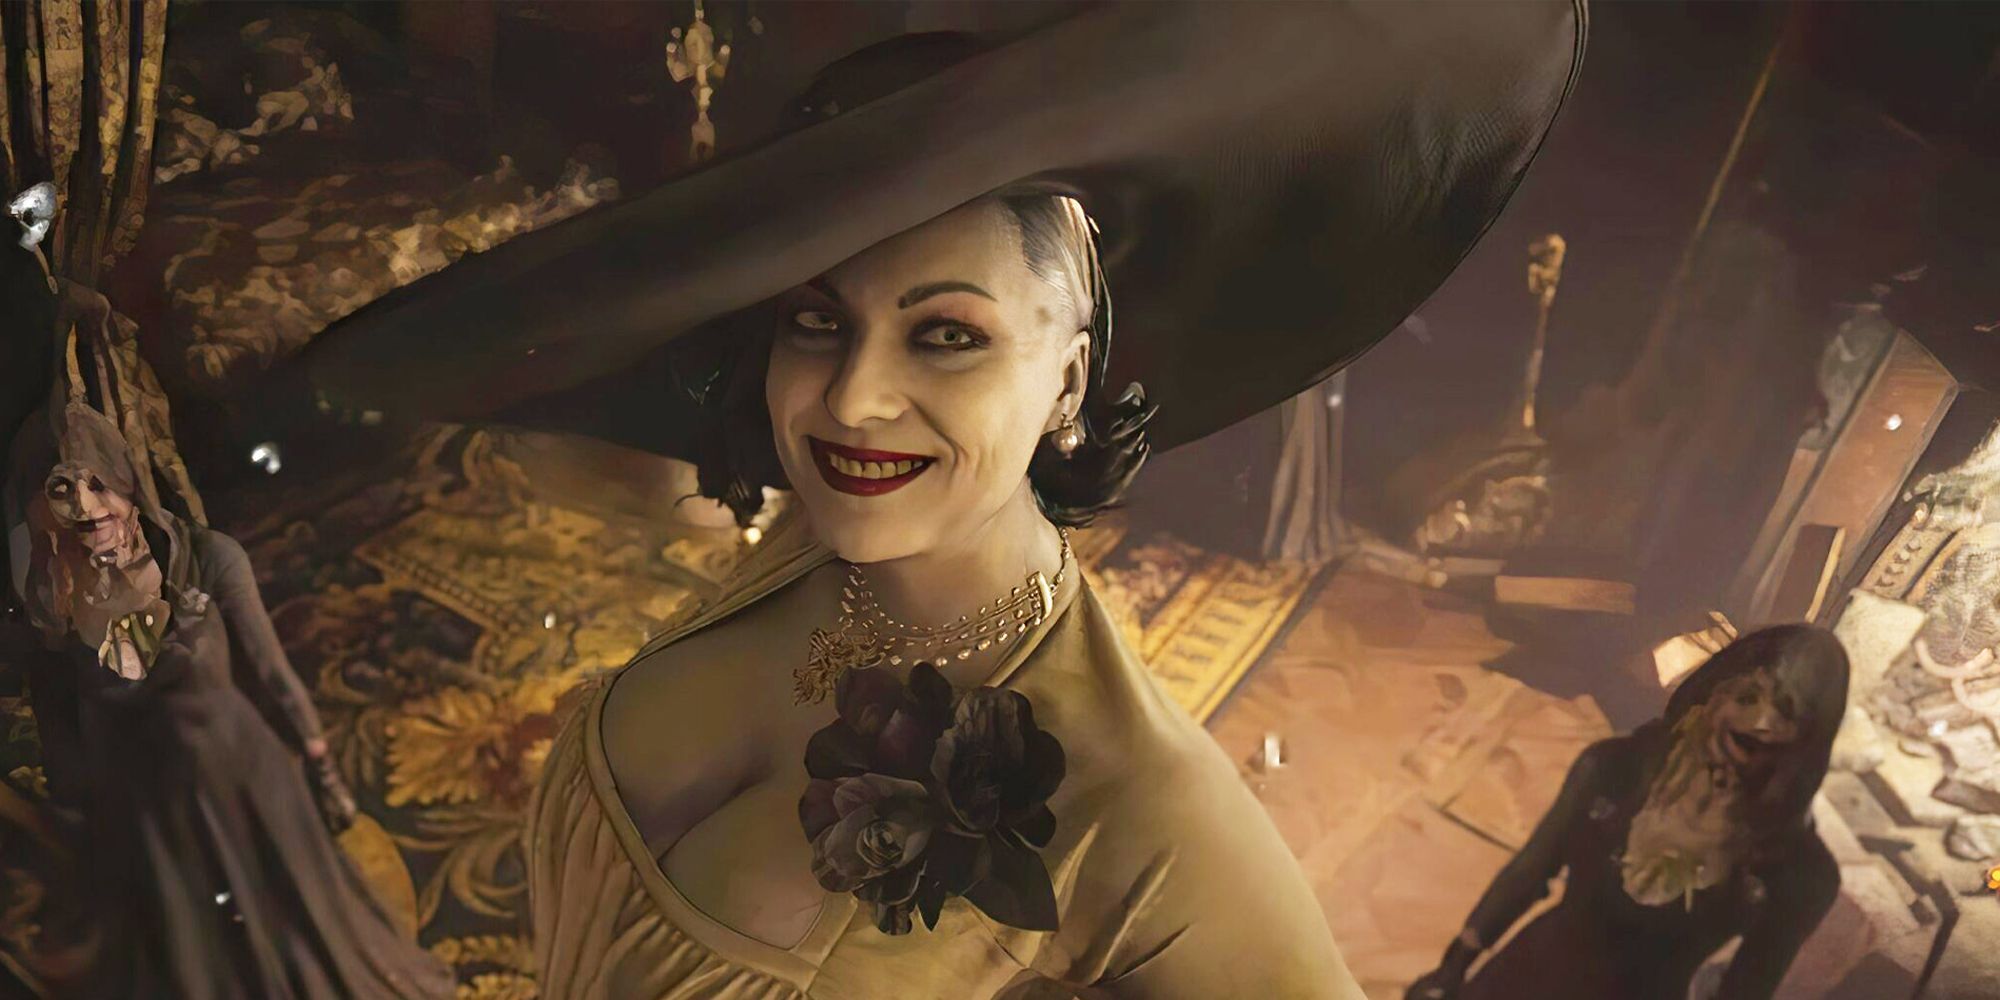 Lady Dimitrescu smiles at Ethan Winters, her daughters Bela, Daniela, and Cassandra behind her. From Resident Evil Village.